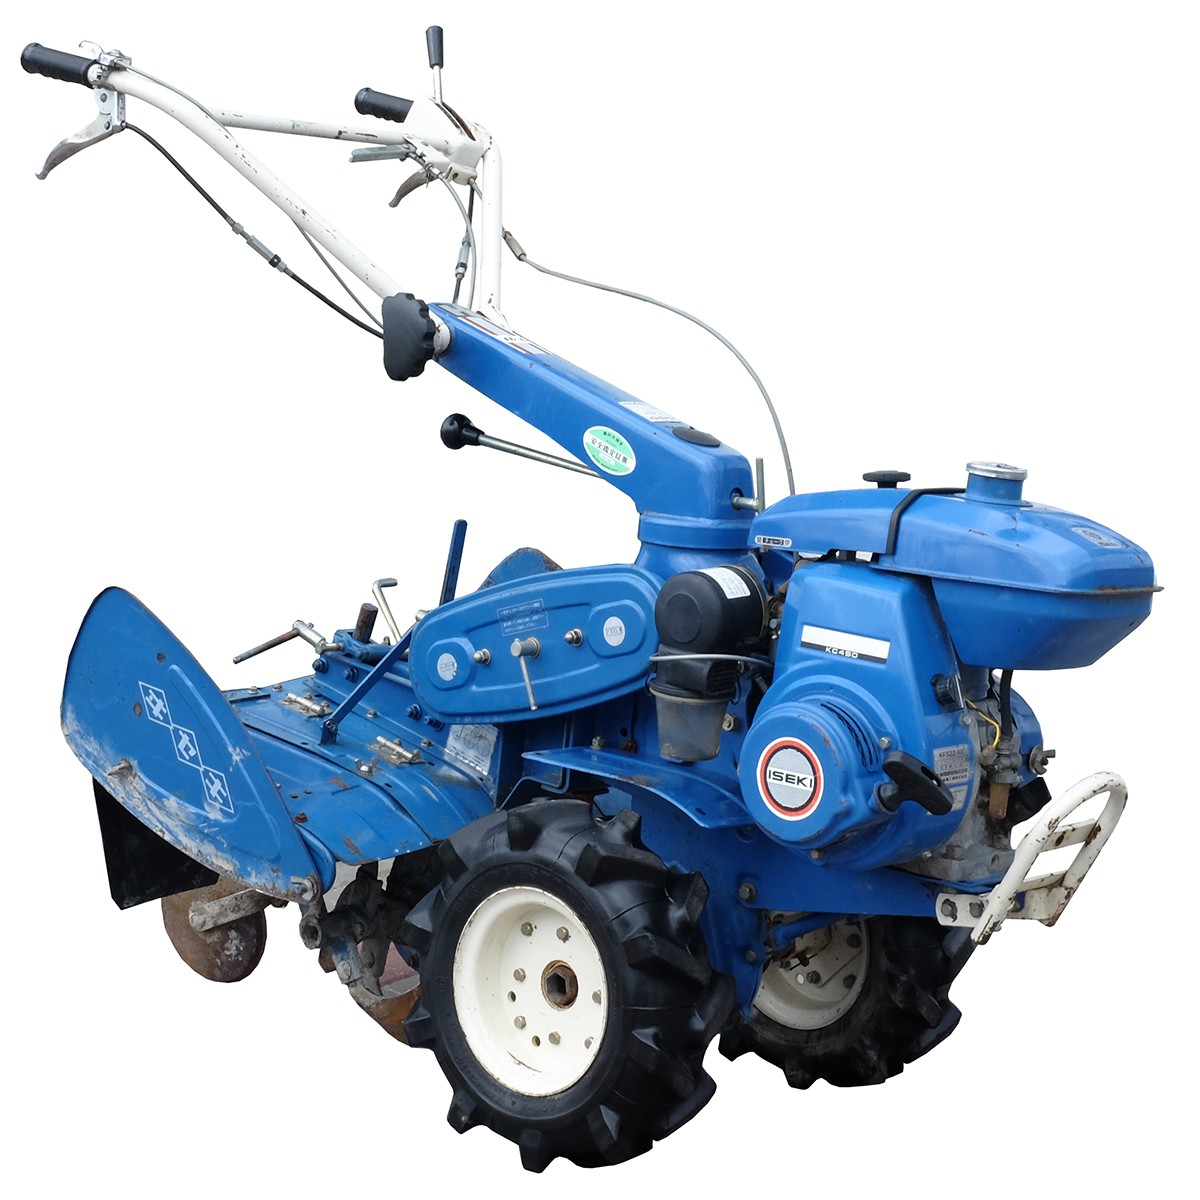 Iseki KC450F single-axle tractor with a power of 4.5 HP